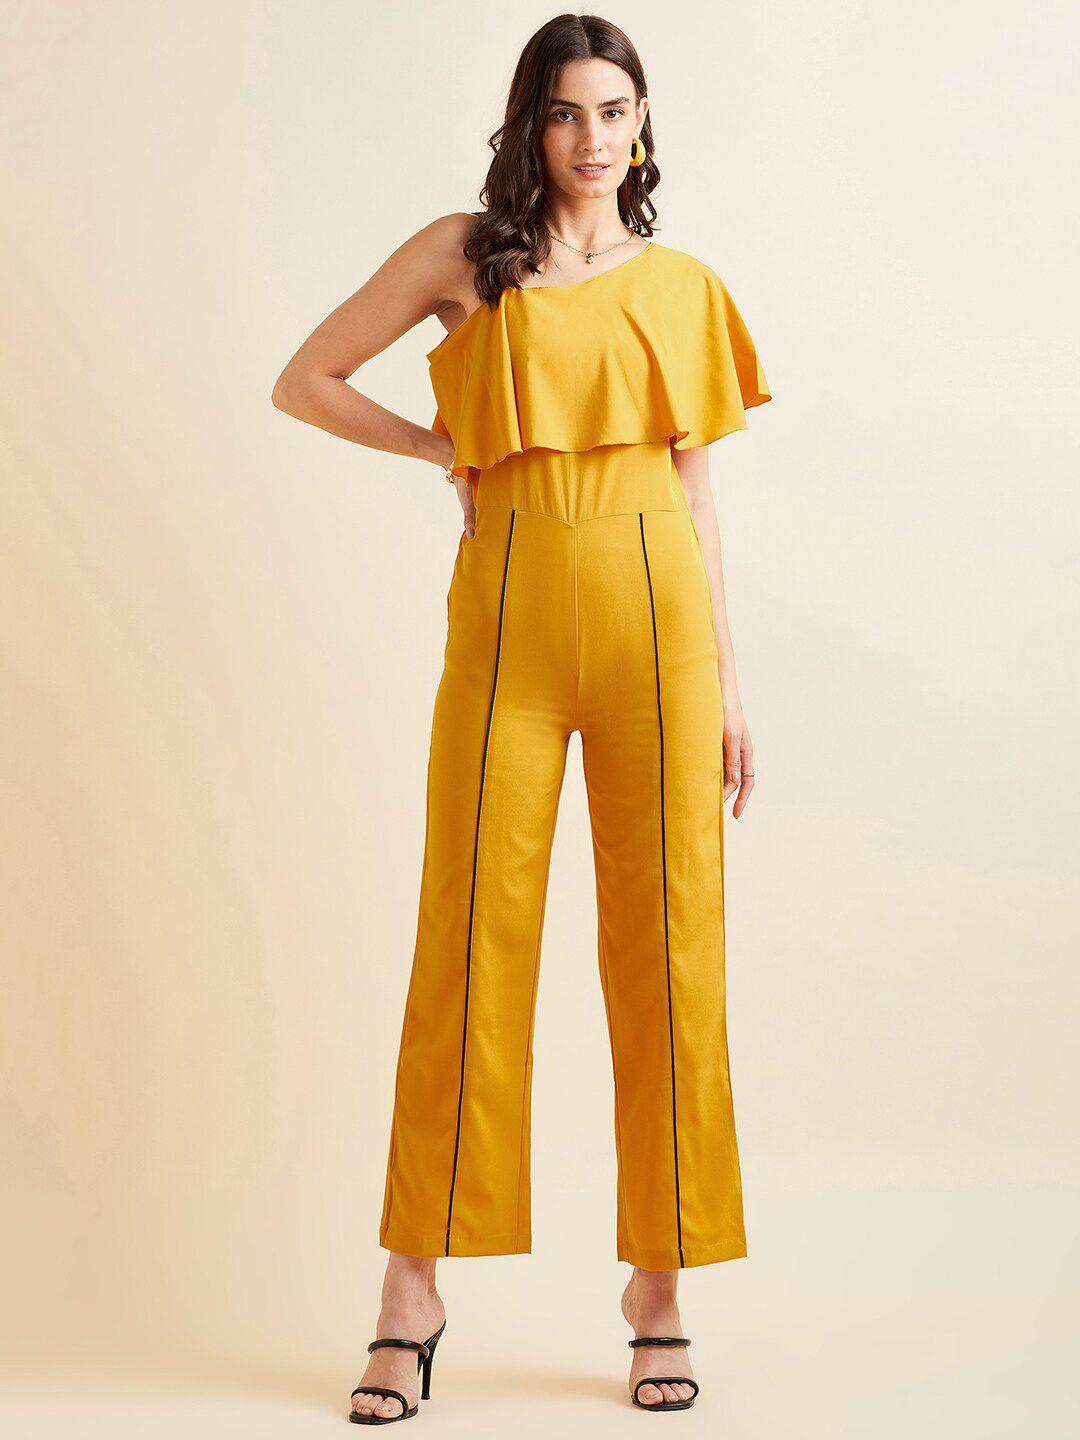 panit yellow basic jumpsuit with ruffles